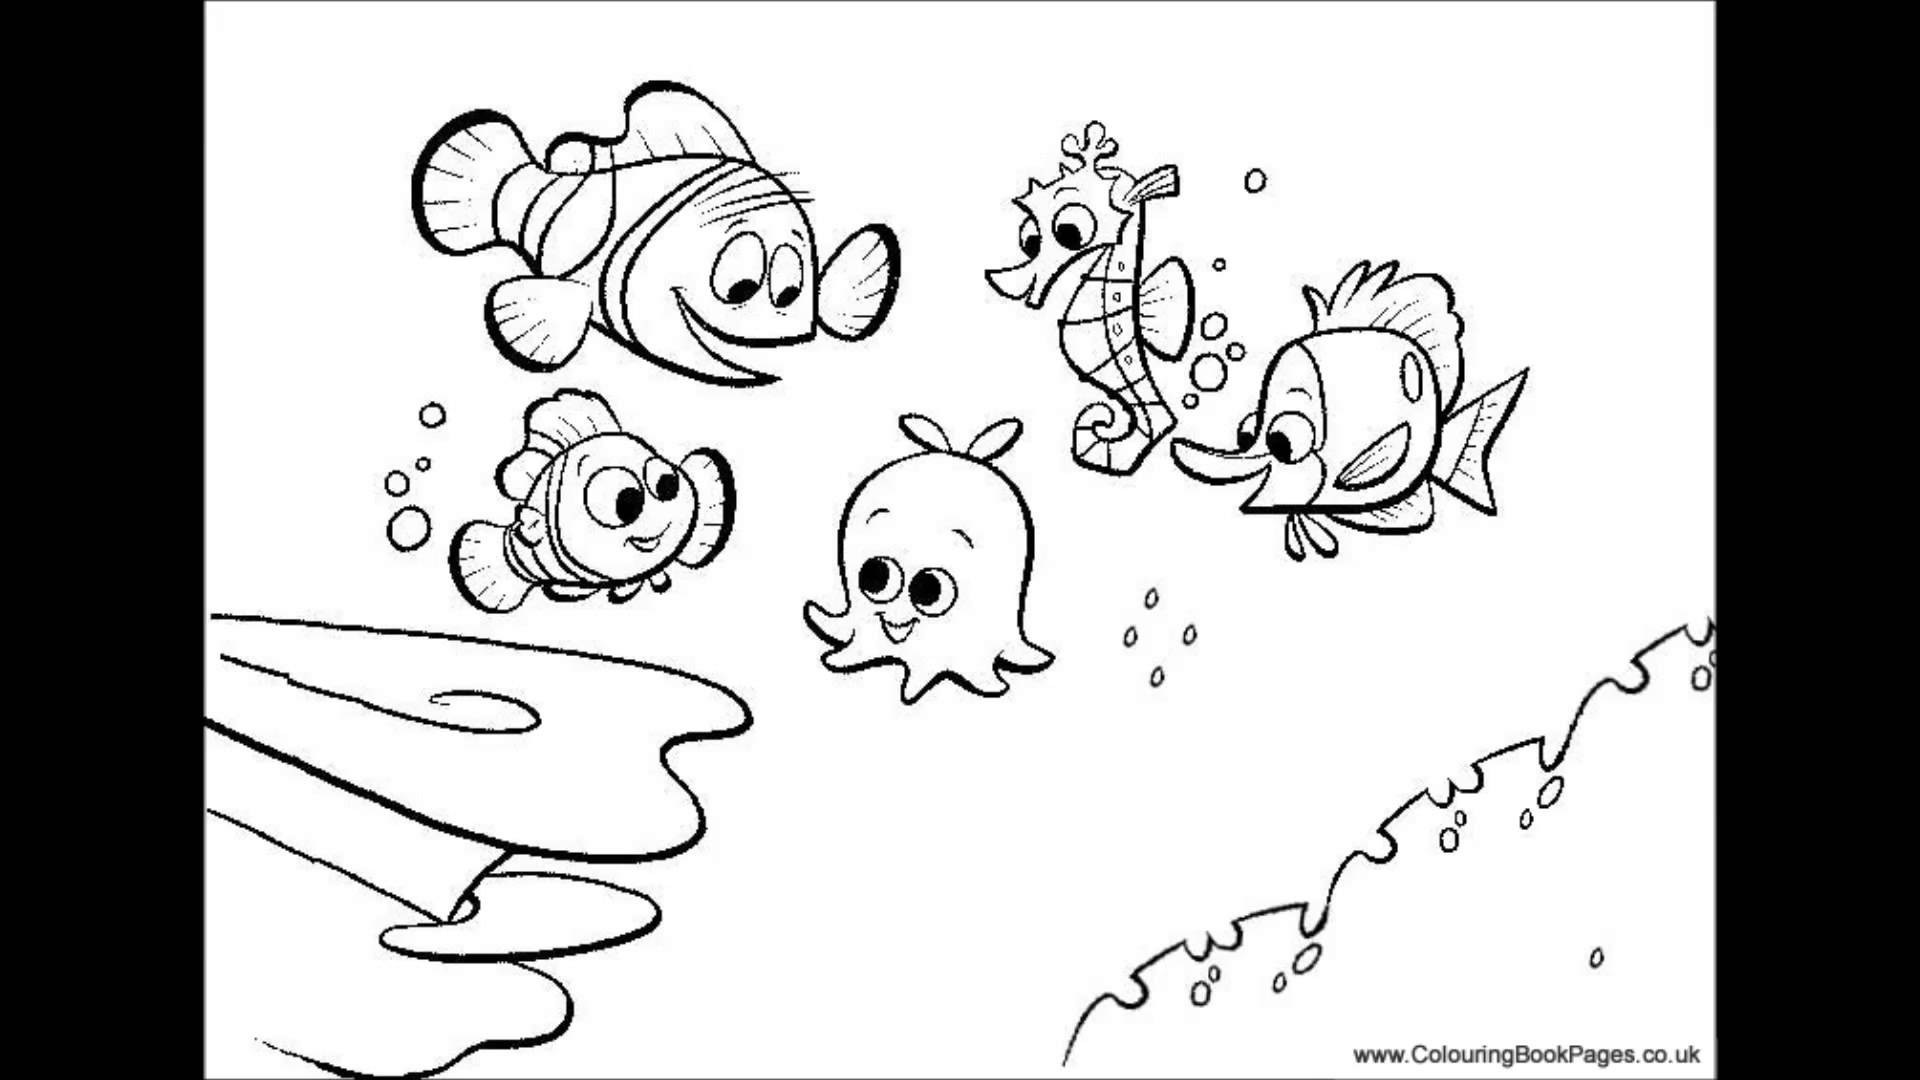 Finding Nemo Characters Coloring Pages Finding Dory Characters Coloring Pages Inspirational Finding Nemo